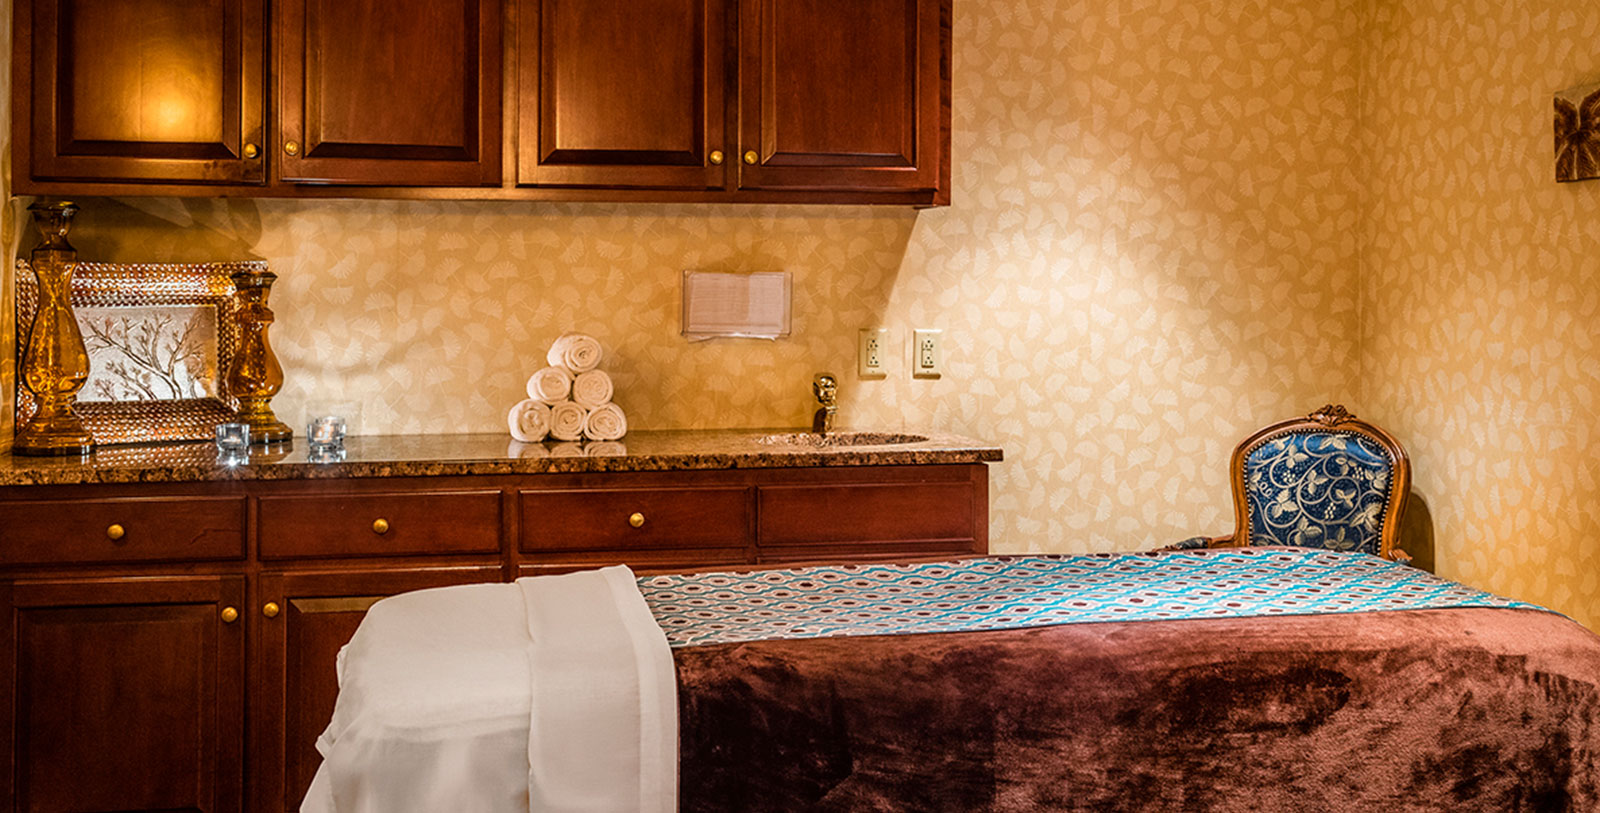 Experience a day of pampering at The Spa at Water's Edge.